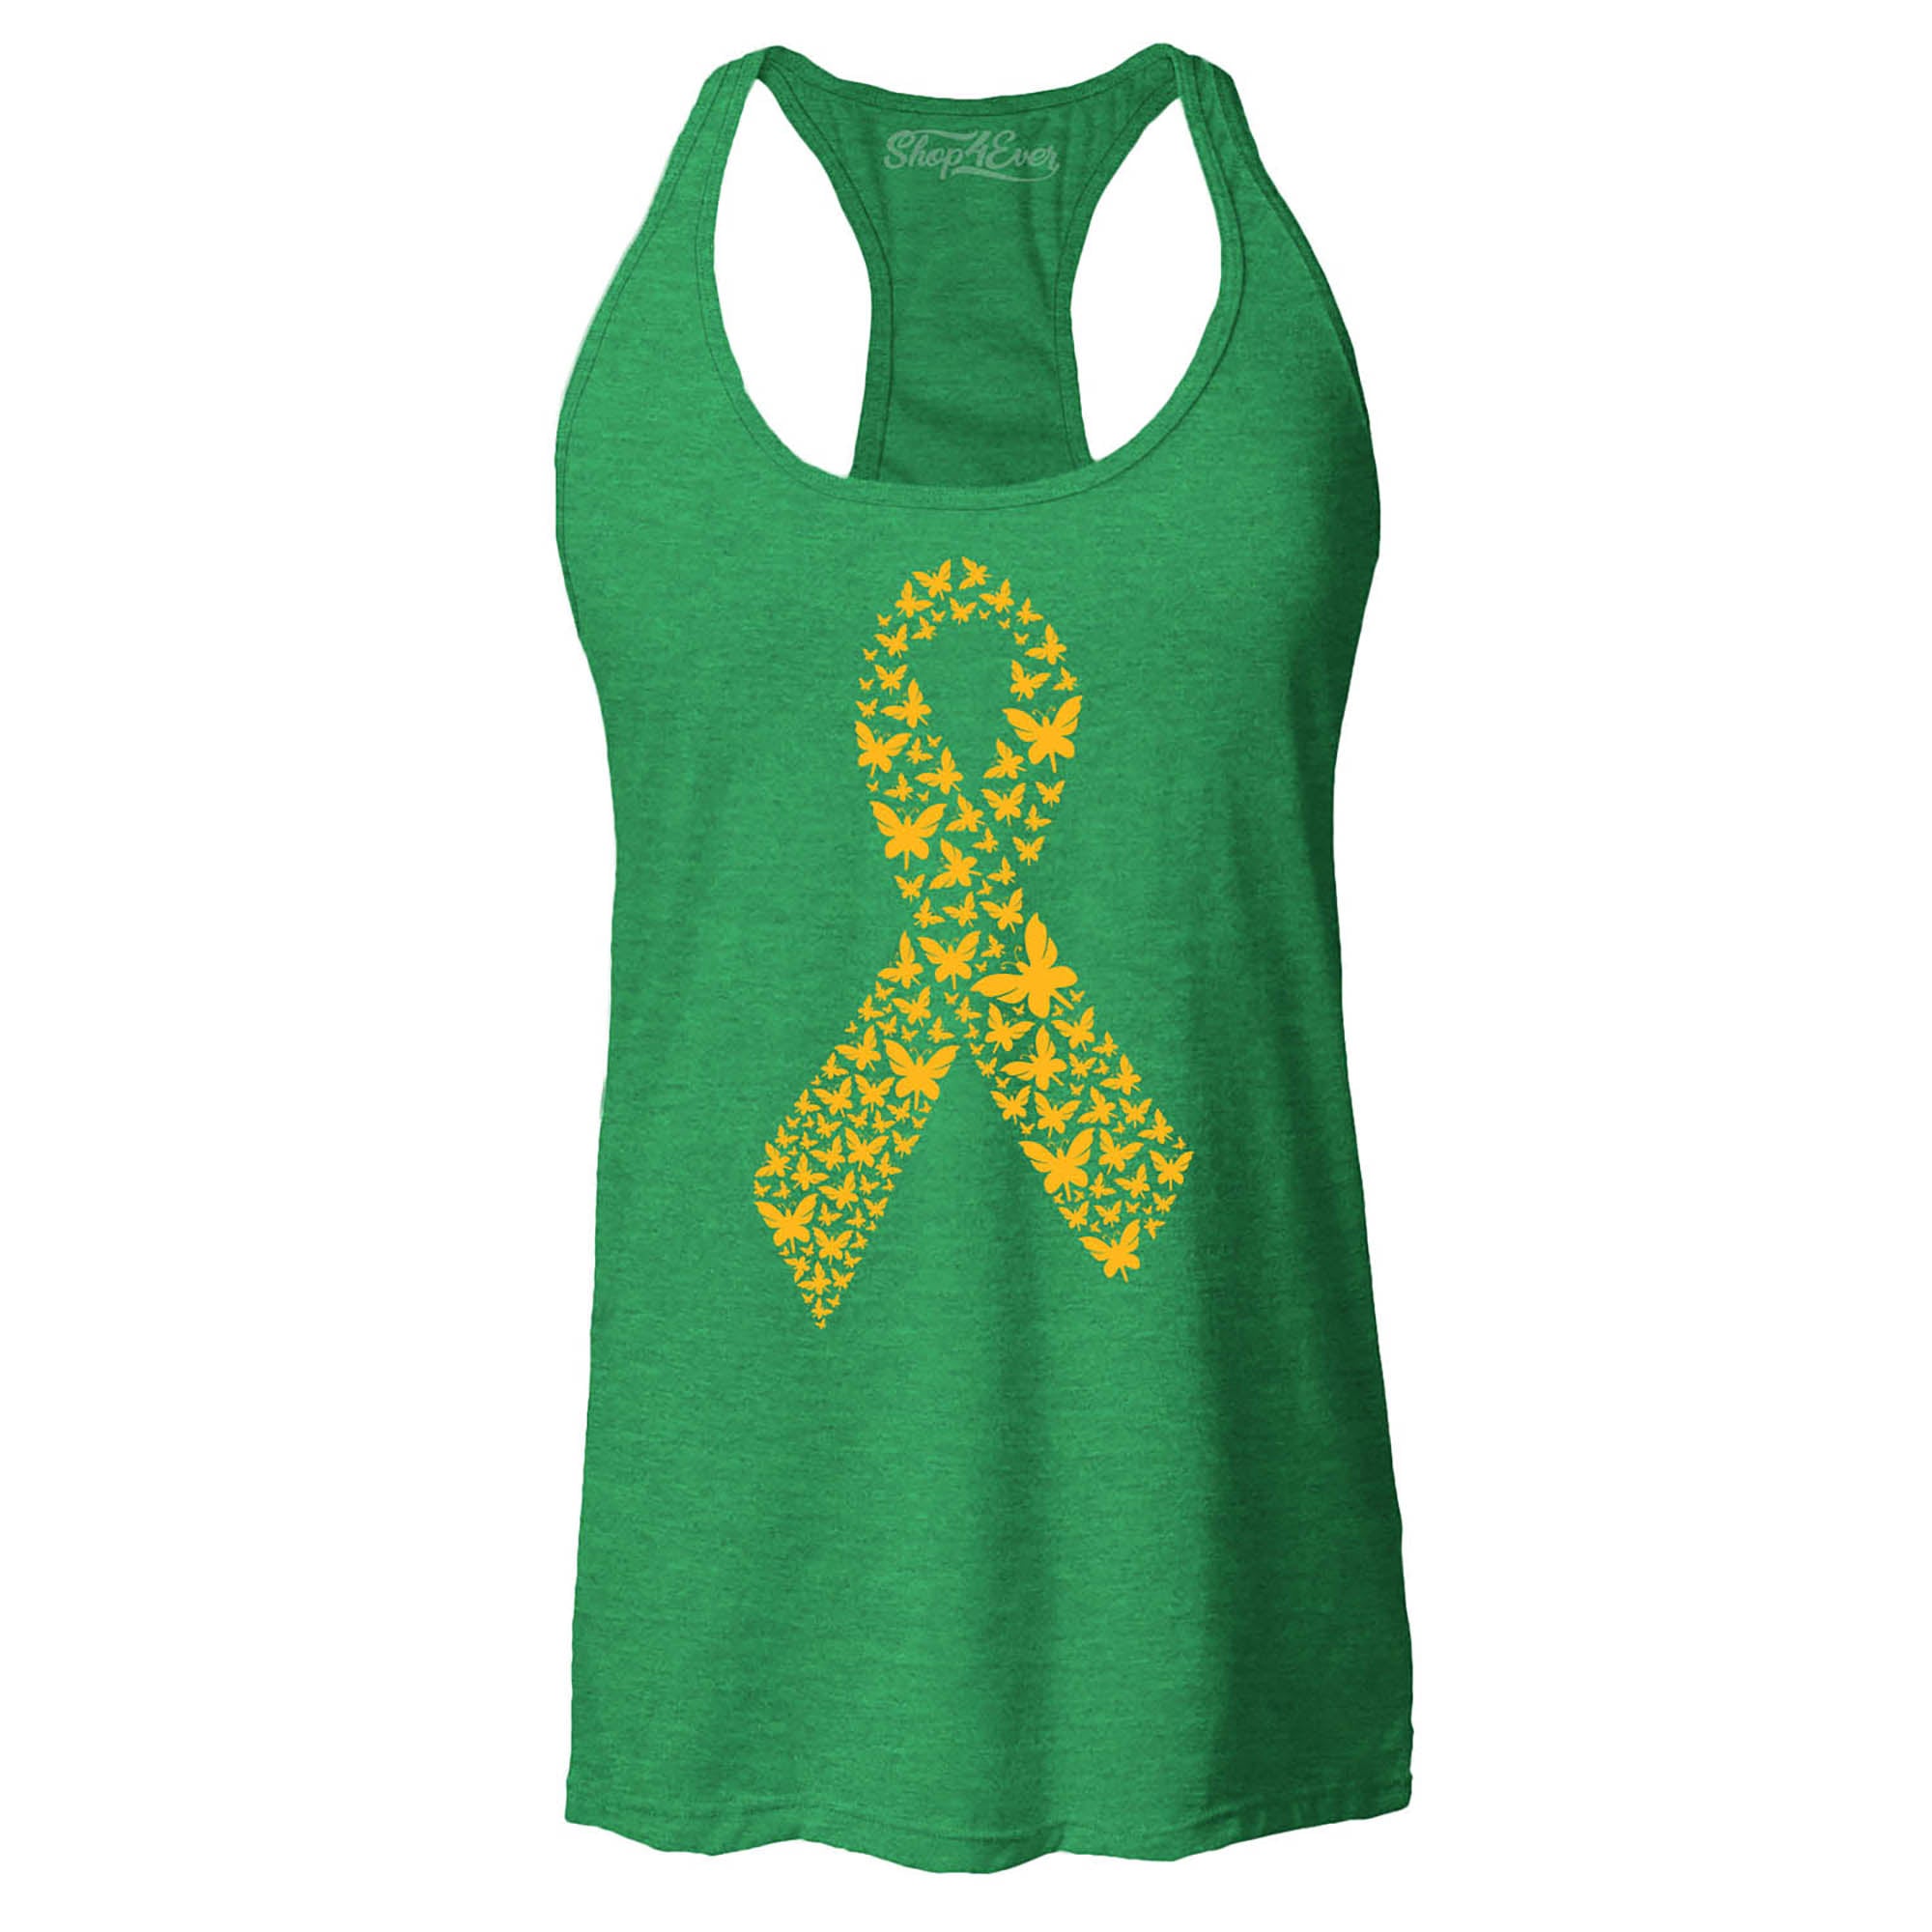 Gold Butterfly Ribbon Childhood Cancer Awareness Women's Racerback Tank Top Slim Fit